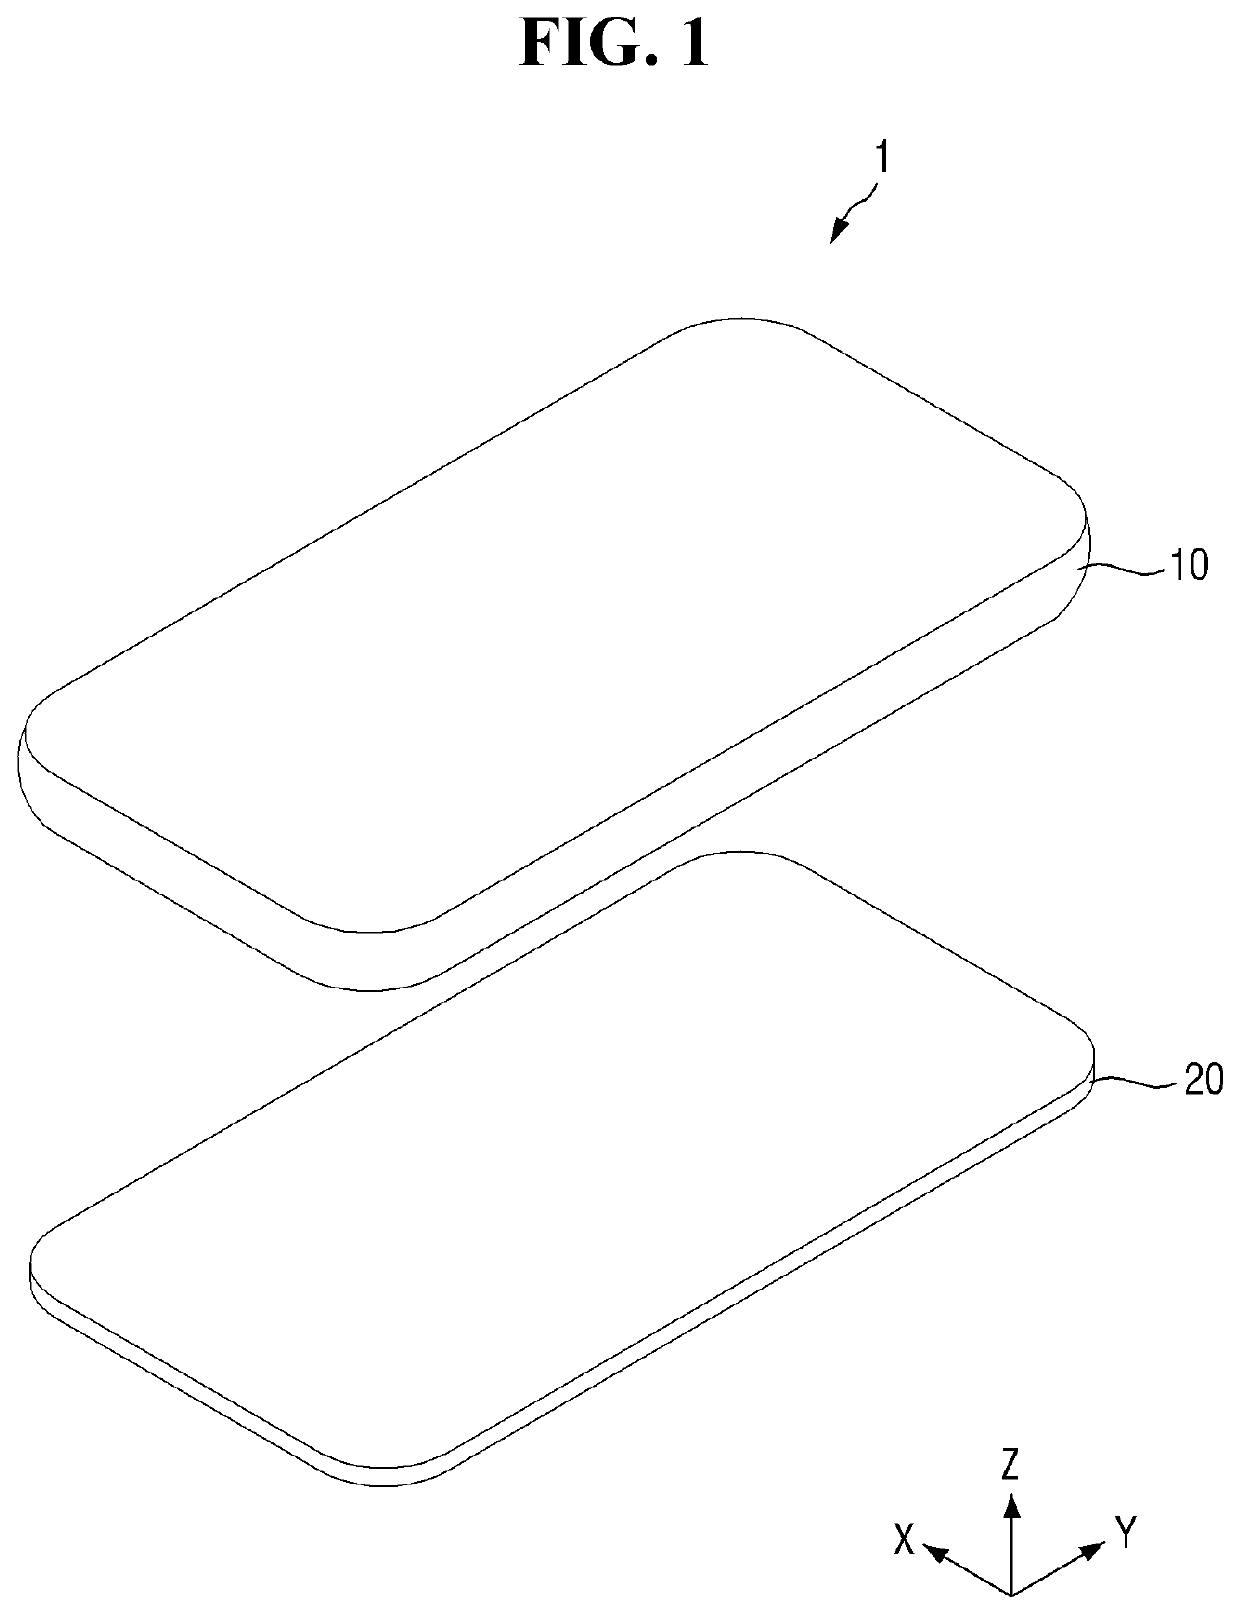 Cover glass printing pad, method of manufacturing cover glass using the same and cover glass manufactured by the same